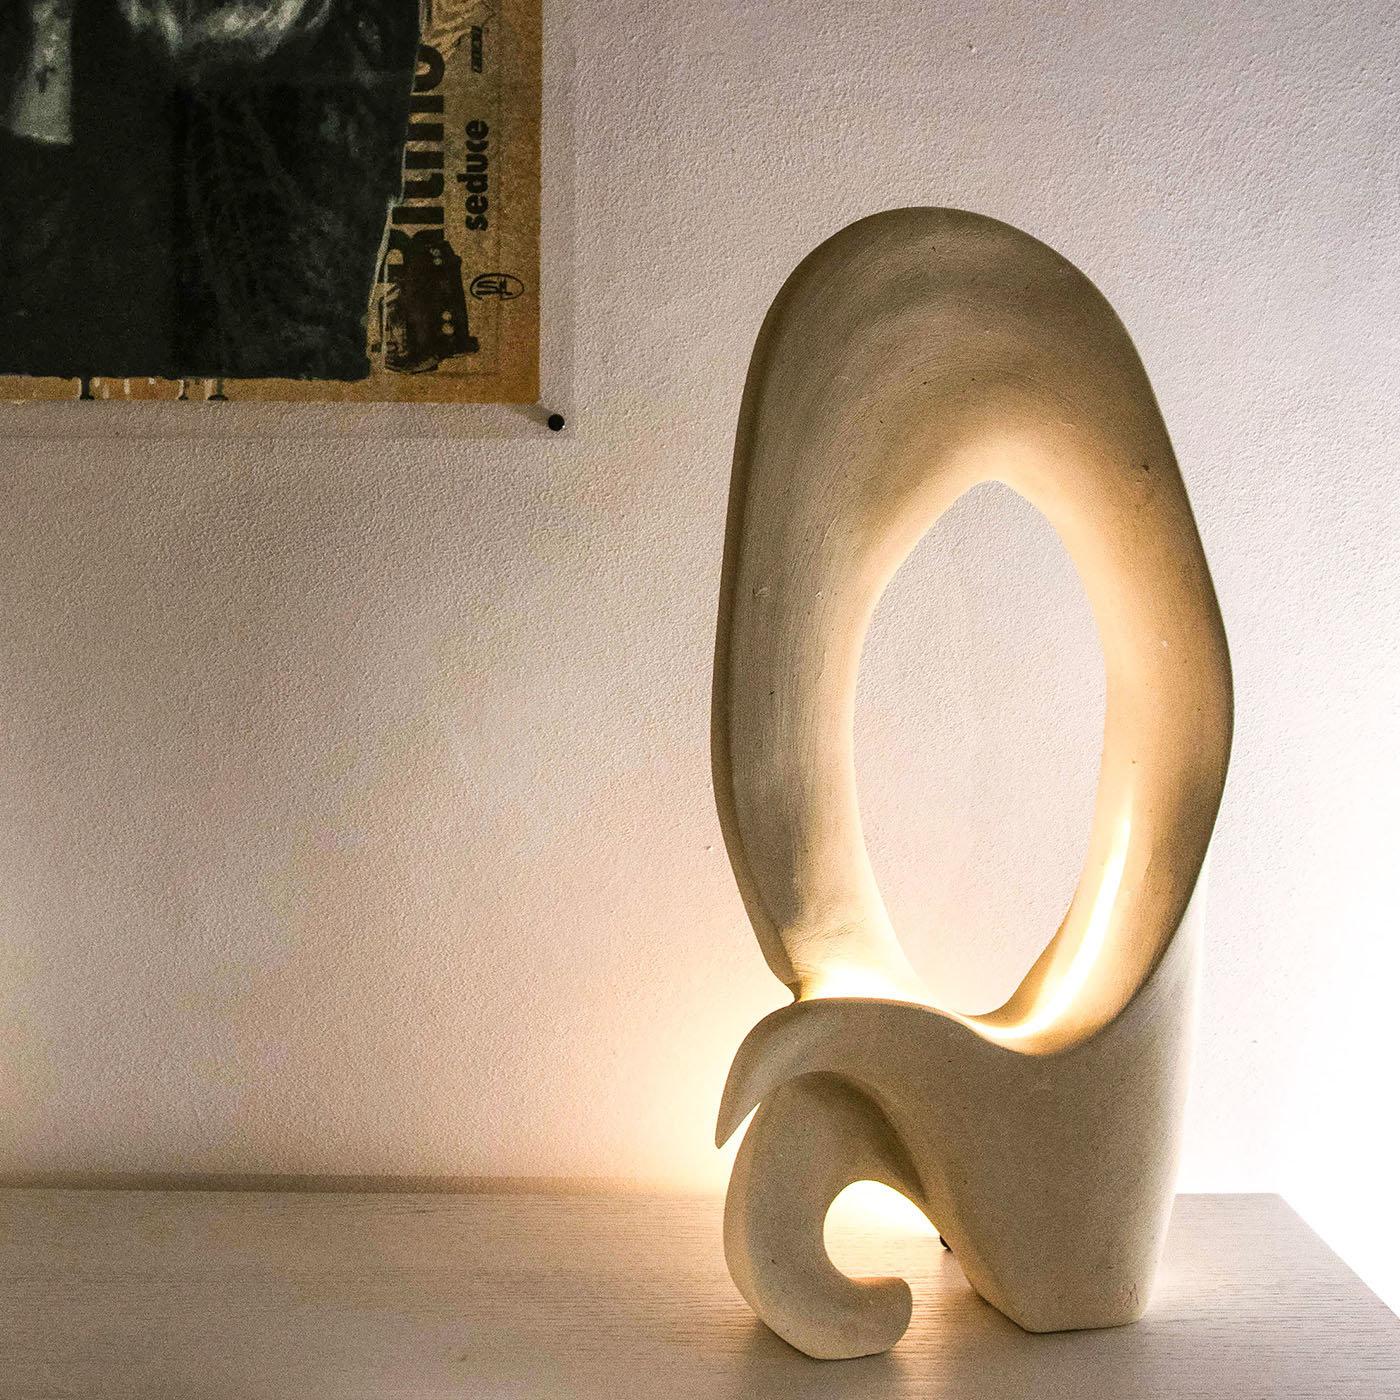 Named after the American state famous for its large waves and iconic surf spots, this sculpture is designed, created and signed by artist Andrea Serra. The sinuous movement of the powerful waves is masterfully hand carved of Lecce stone, a unique